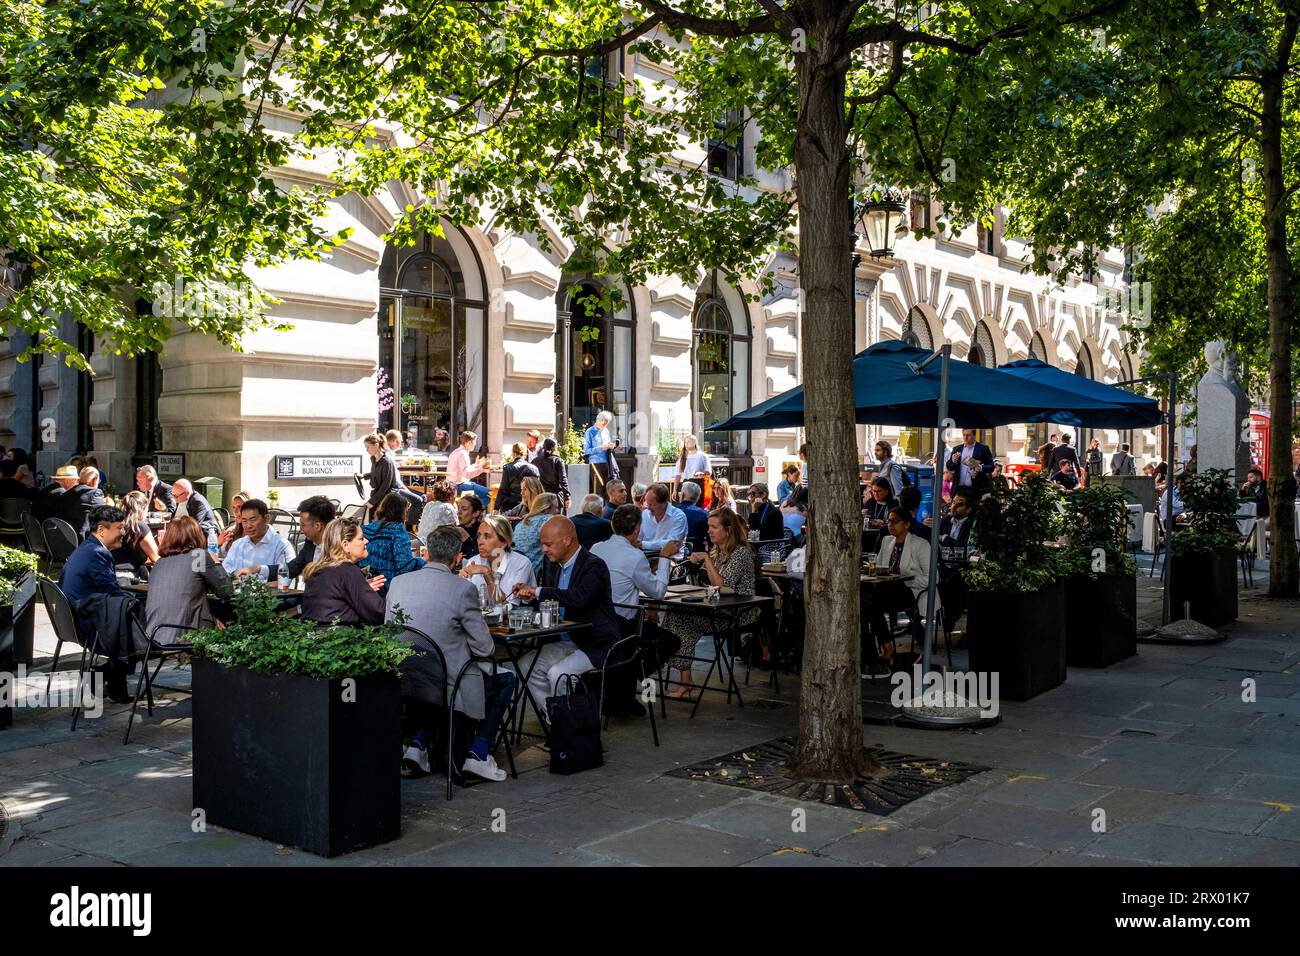 People Eating Outdoors At The Royal Exchange Buildings, City of London, London, UK. Stock Photo